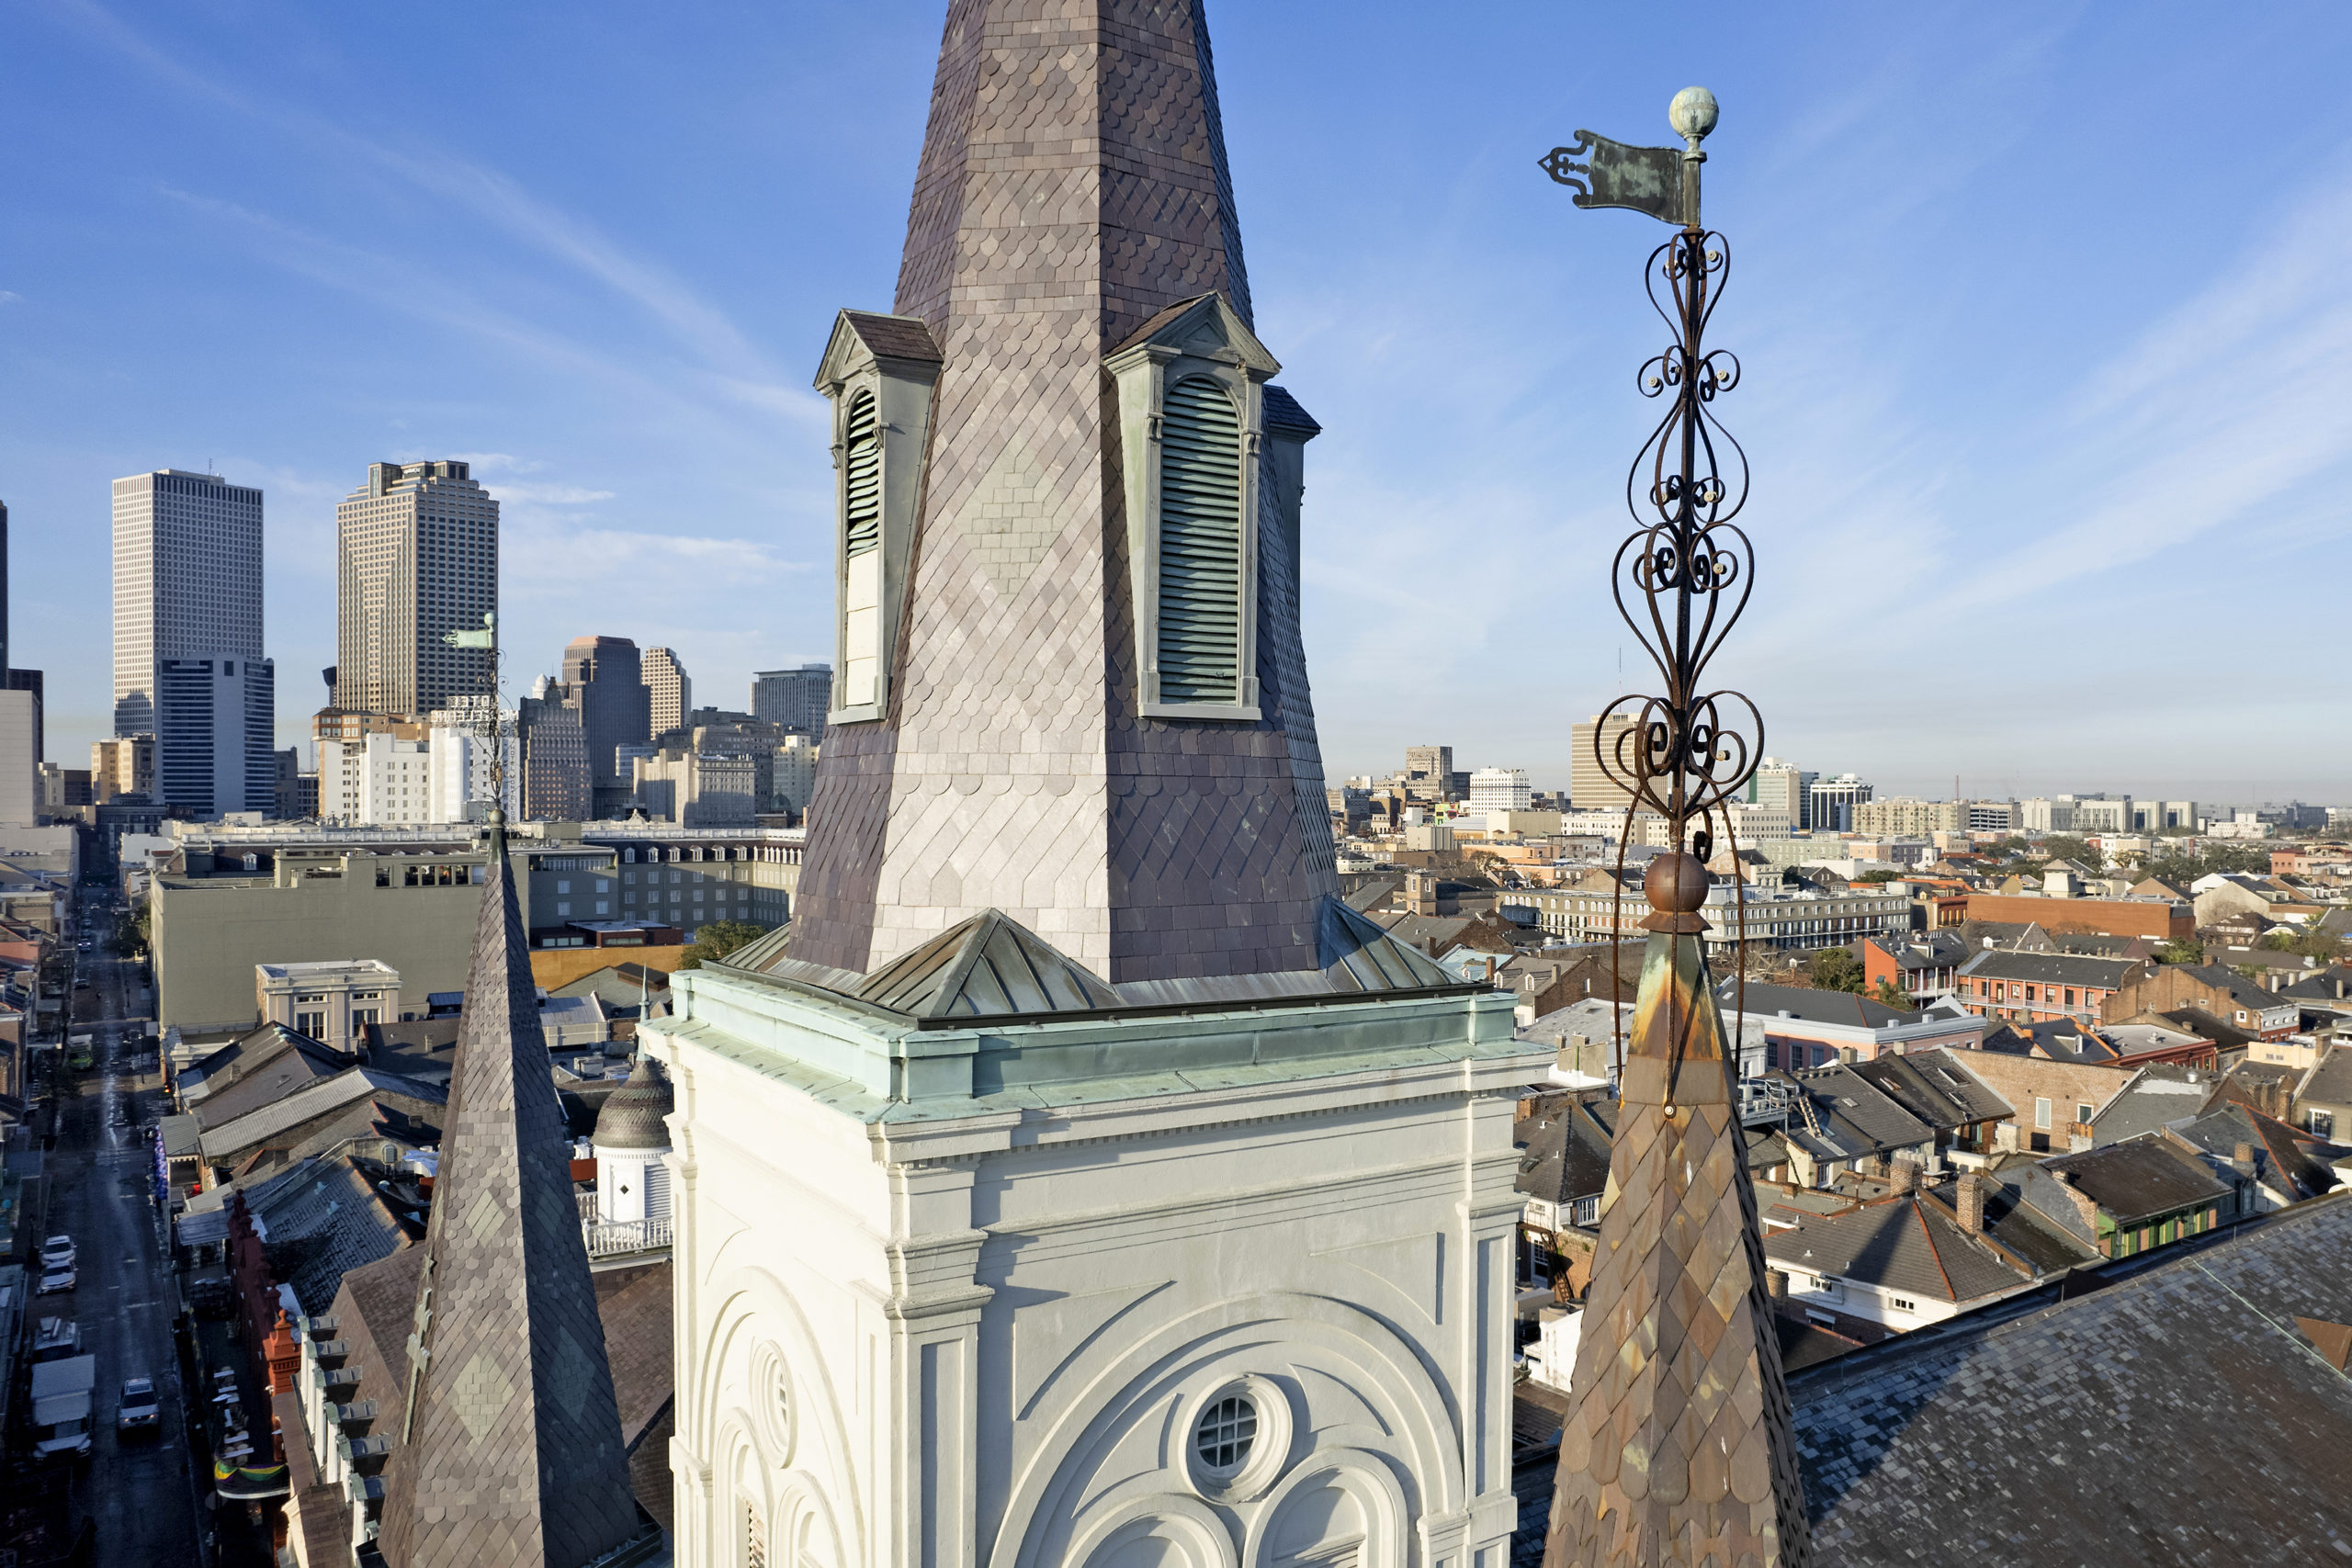 Decorative iron pieces atop the two flanking spires on St. Louis Cathedral. (Photo by Michael DeMocker)